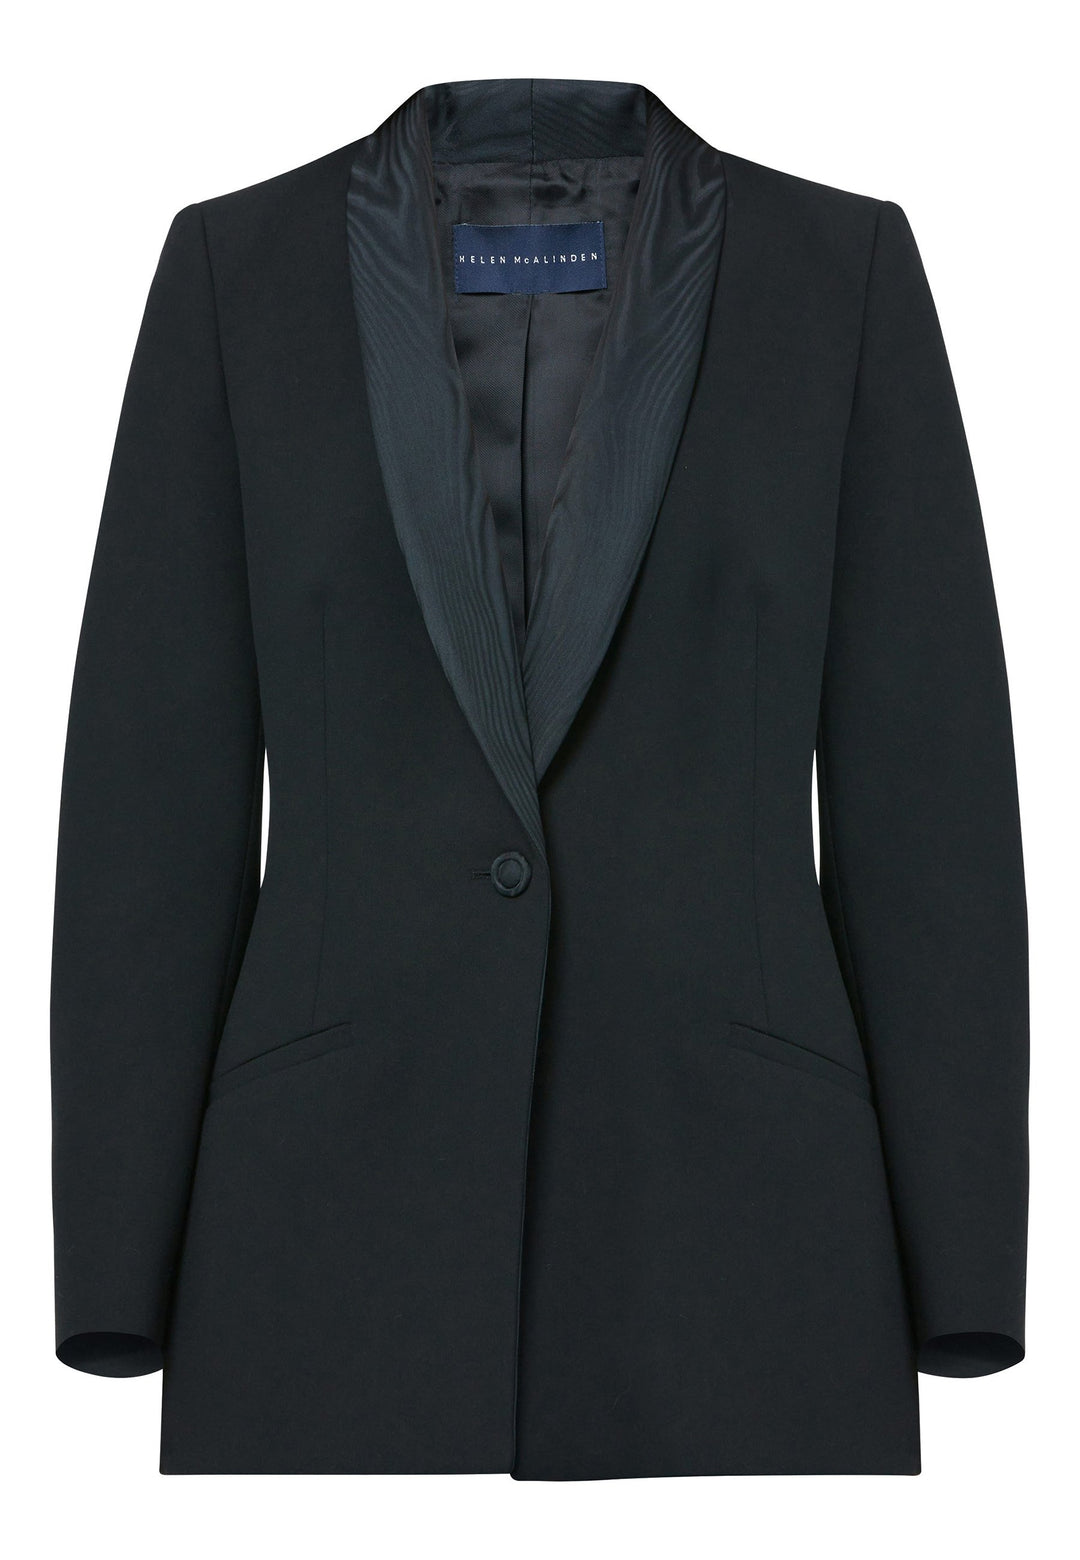 Discover the Darcie Black Jacket, an essential piece for any minimalist wardrobe. This exquisitely crafted tuxedo jacket is a timeless investment, featuring a traditional shawl collar and sleek welt pockets. Its semi-fitted silhouette, accentuated by a single button closure, offers a flattering look. Meticulously tailored from our renowned fabric, this jacket ensures both comfort and flexibility with a touch of stretch.